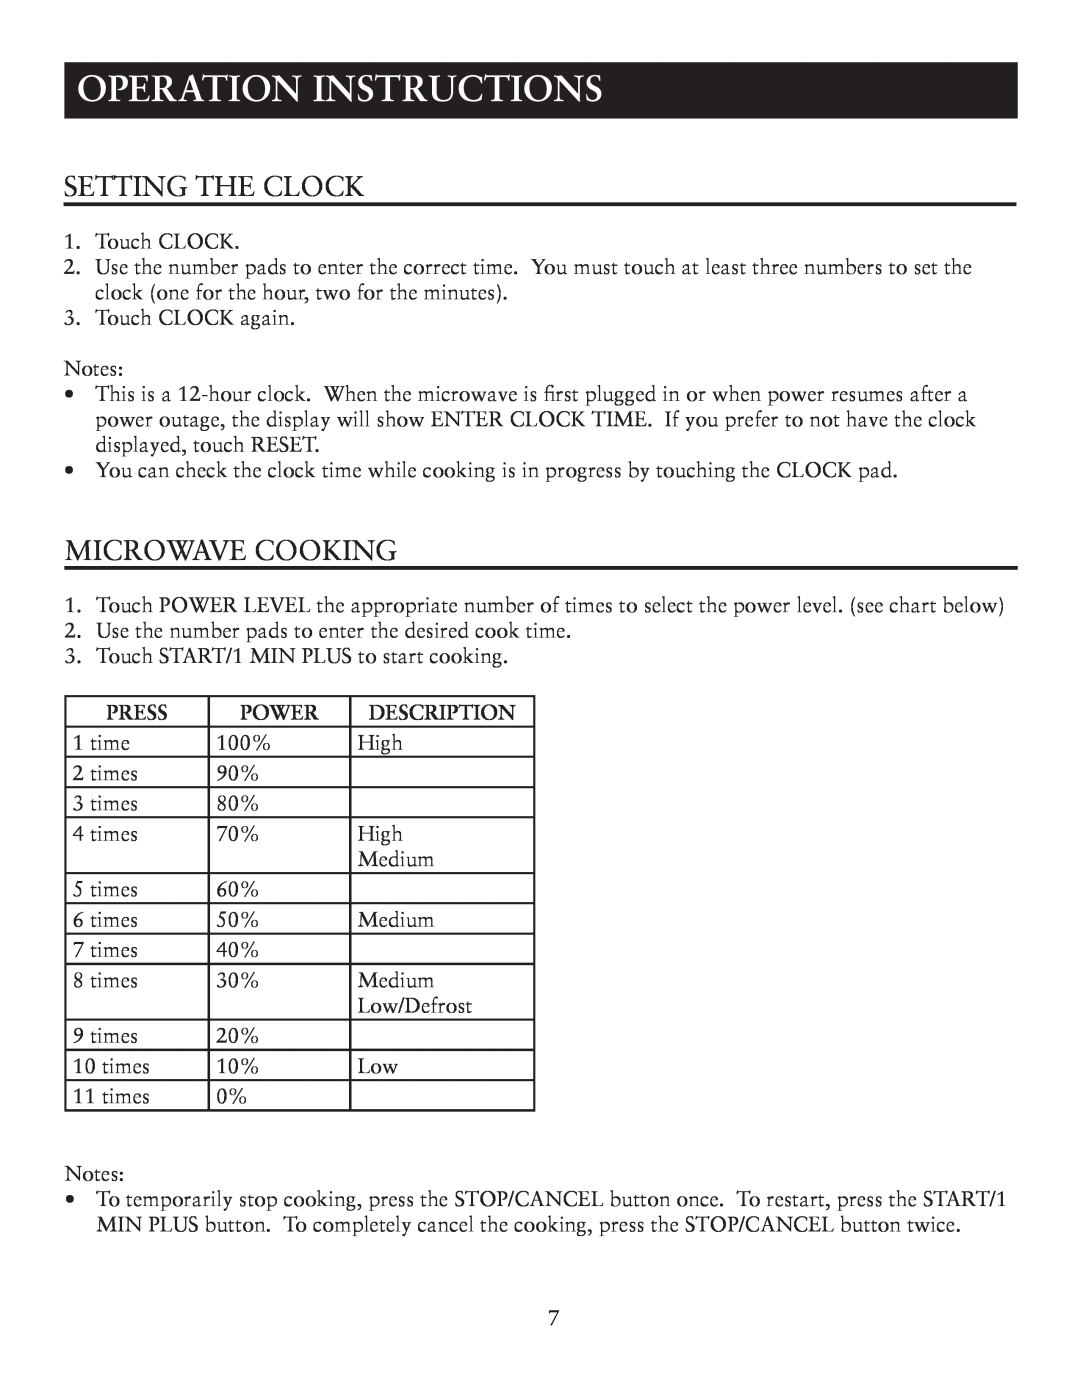 Oster OTM1101VBS user manual Operation Instructions, Setting The Clock, Microwave Cooking, Press, Power, Description 